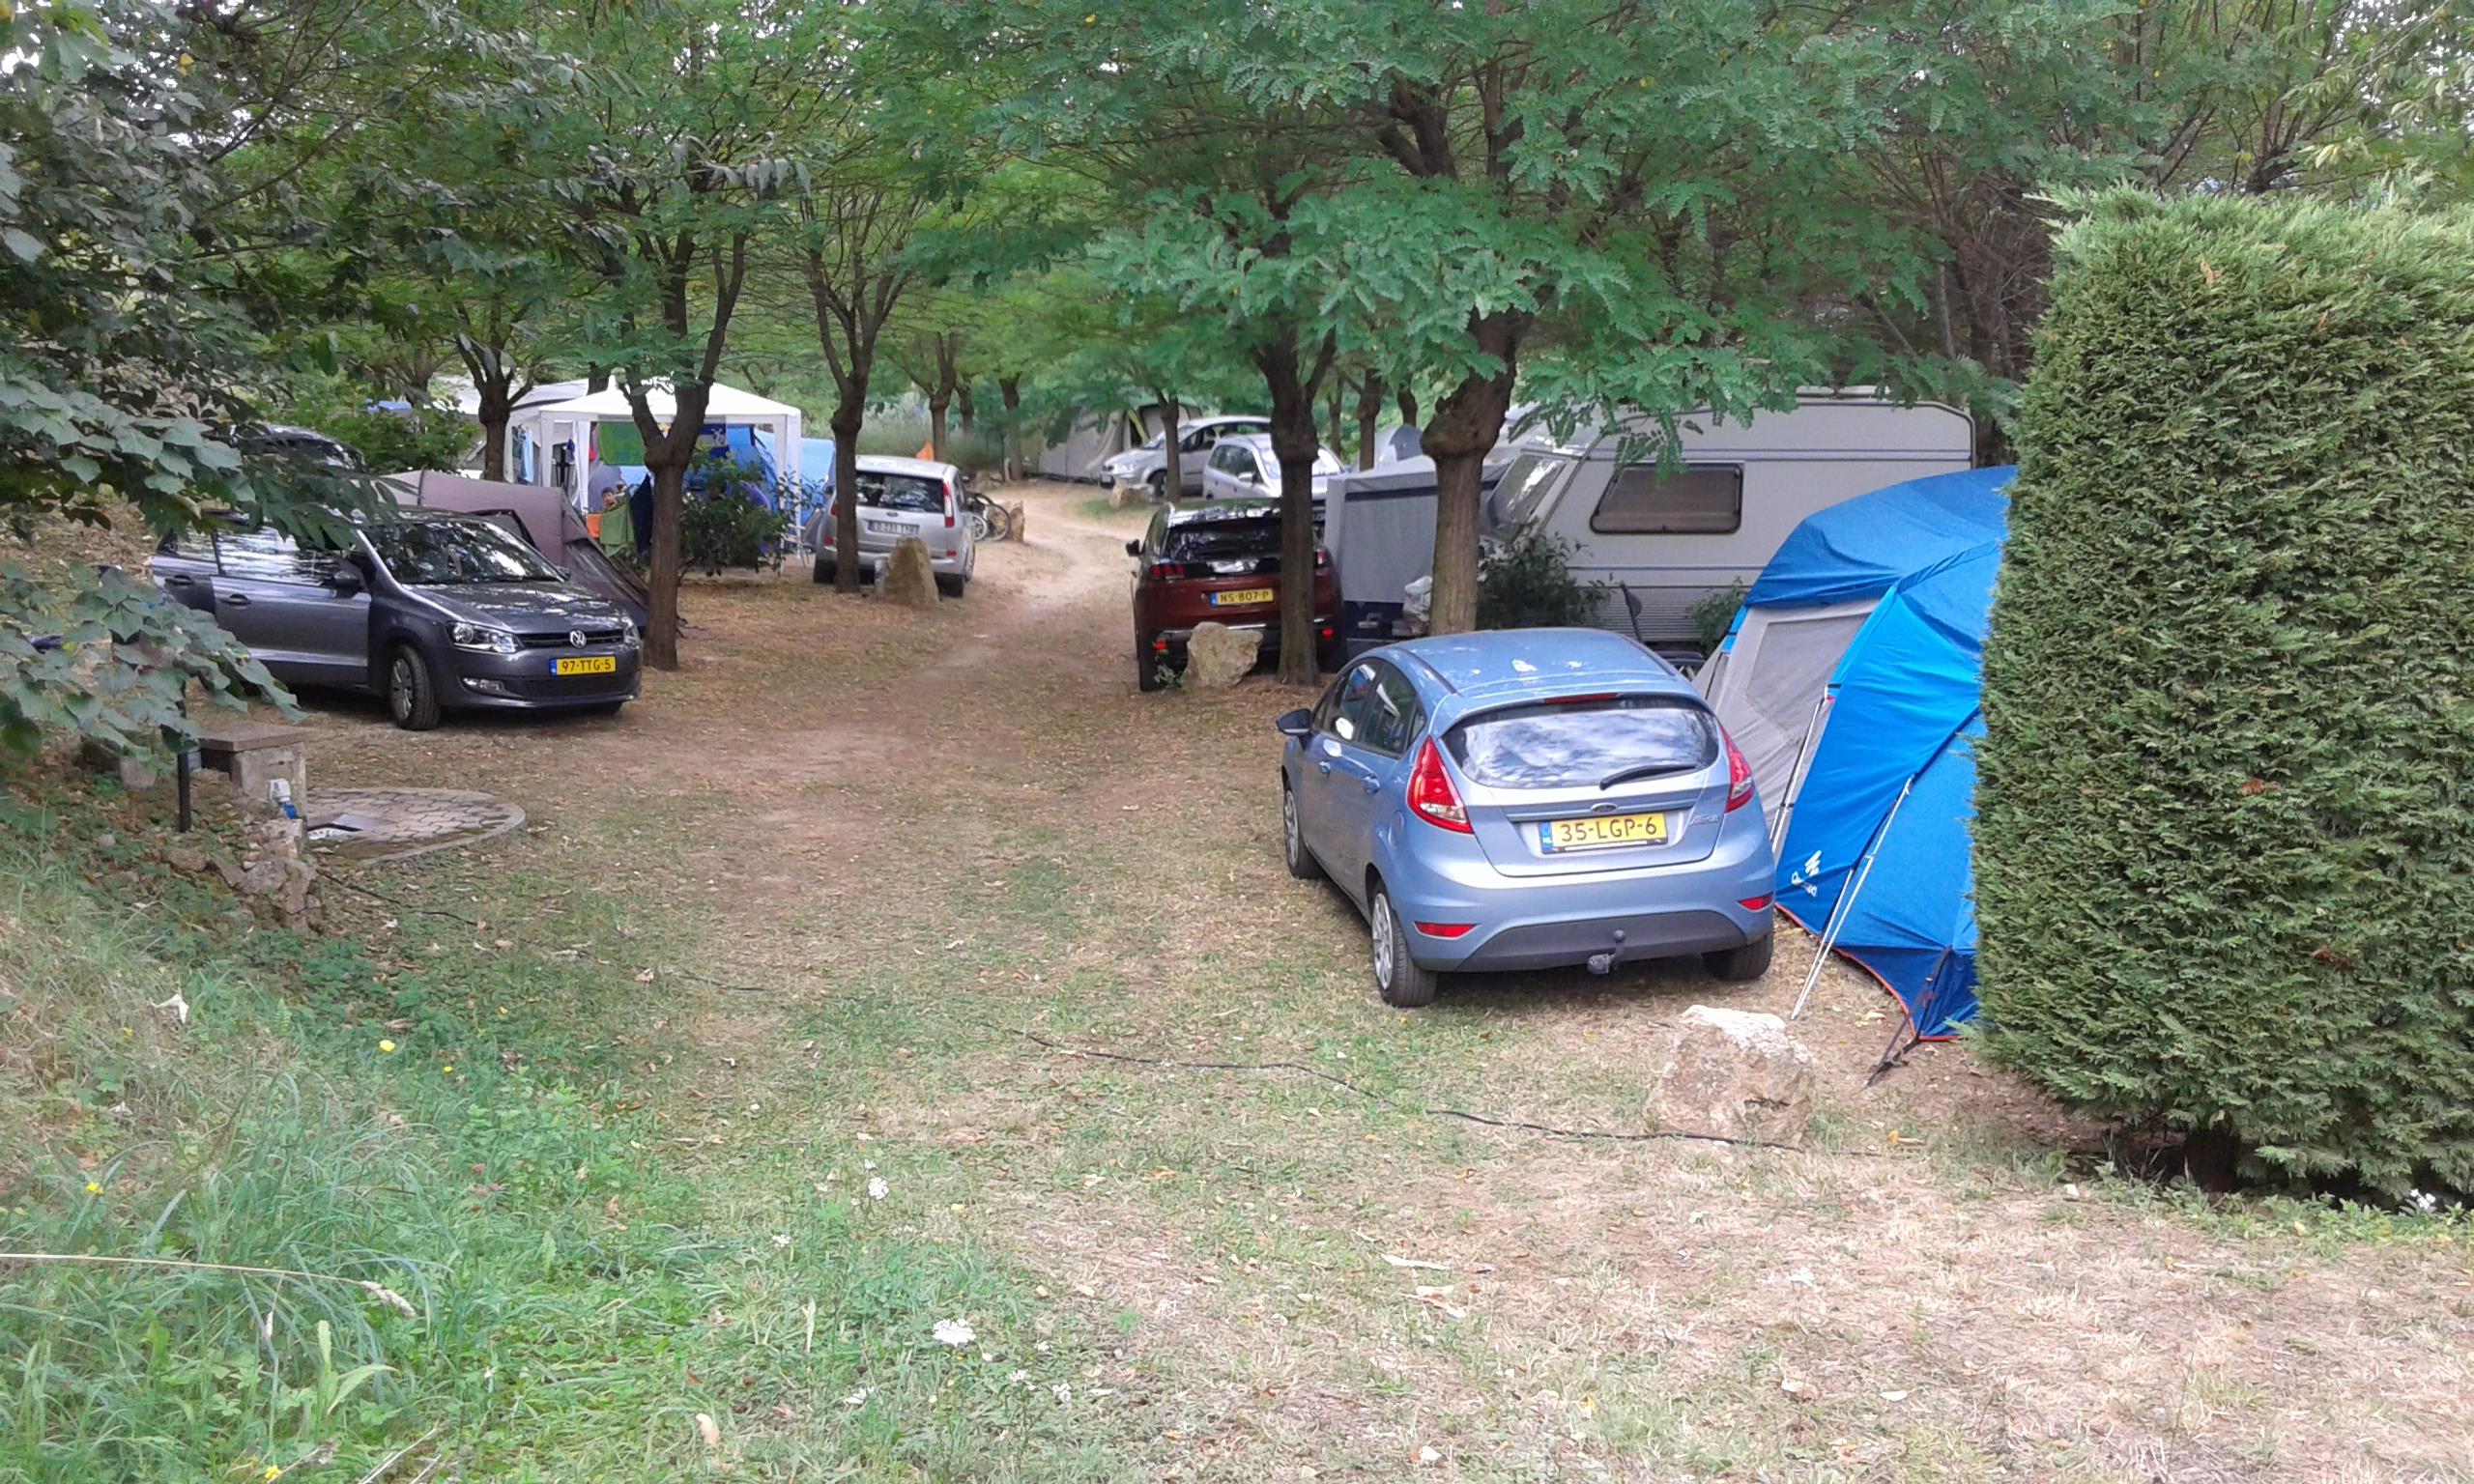 Pitch - Service Area And Parking For Camper 7/7 With Terminal Cash - Domaine Camping  Les Roches